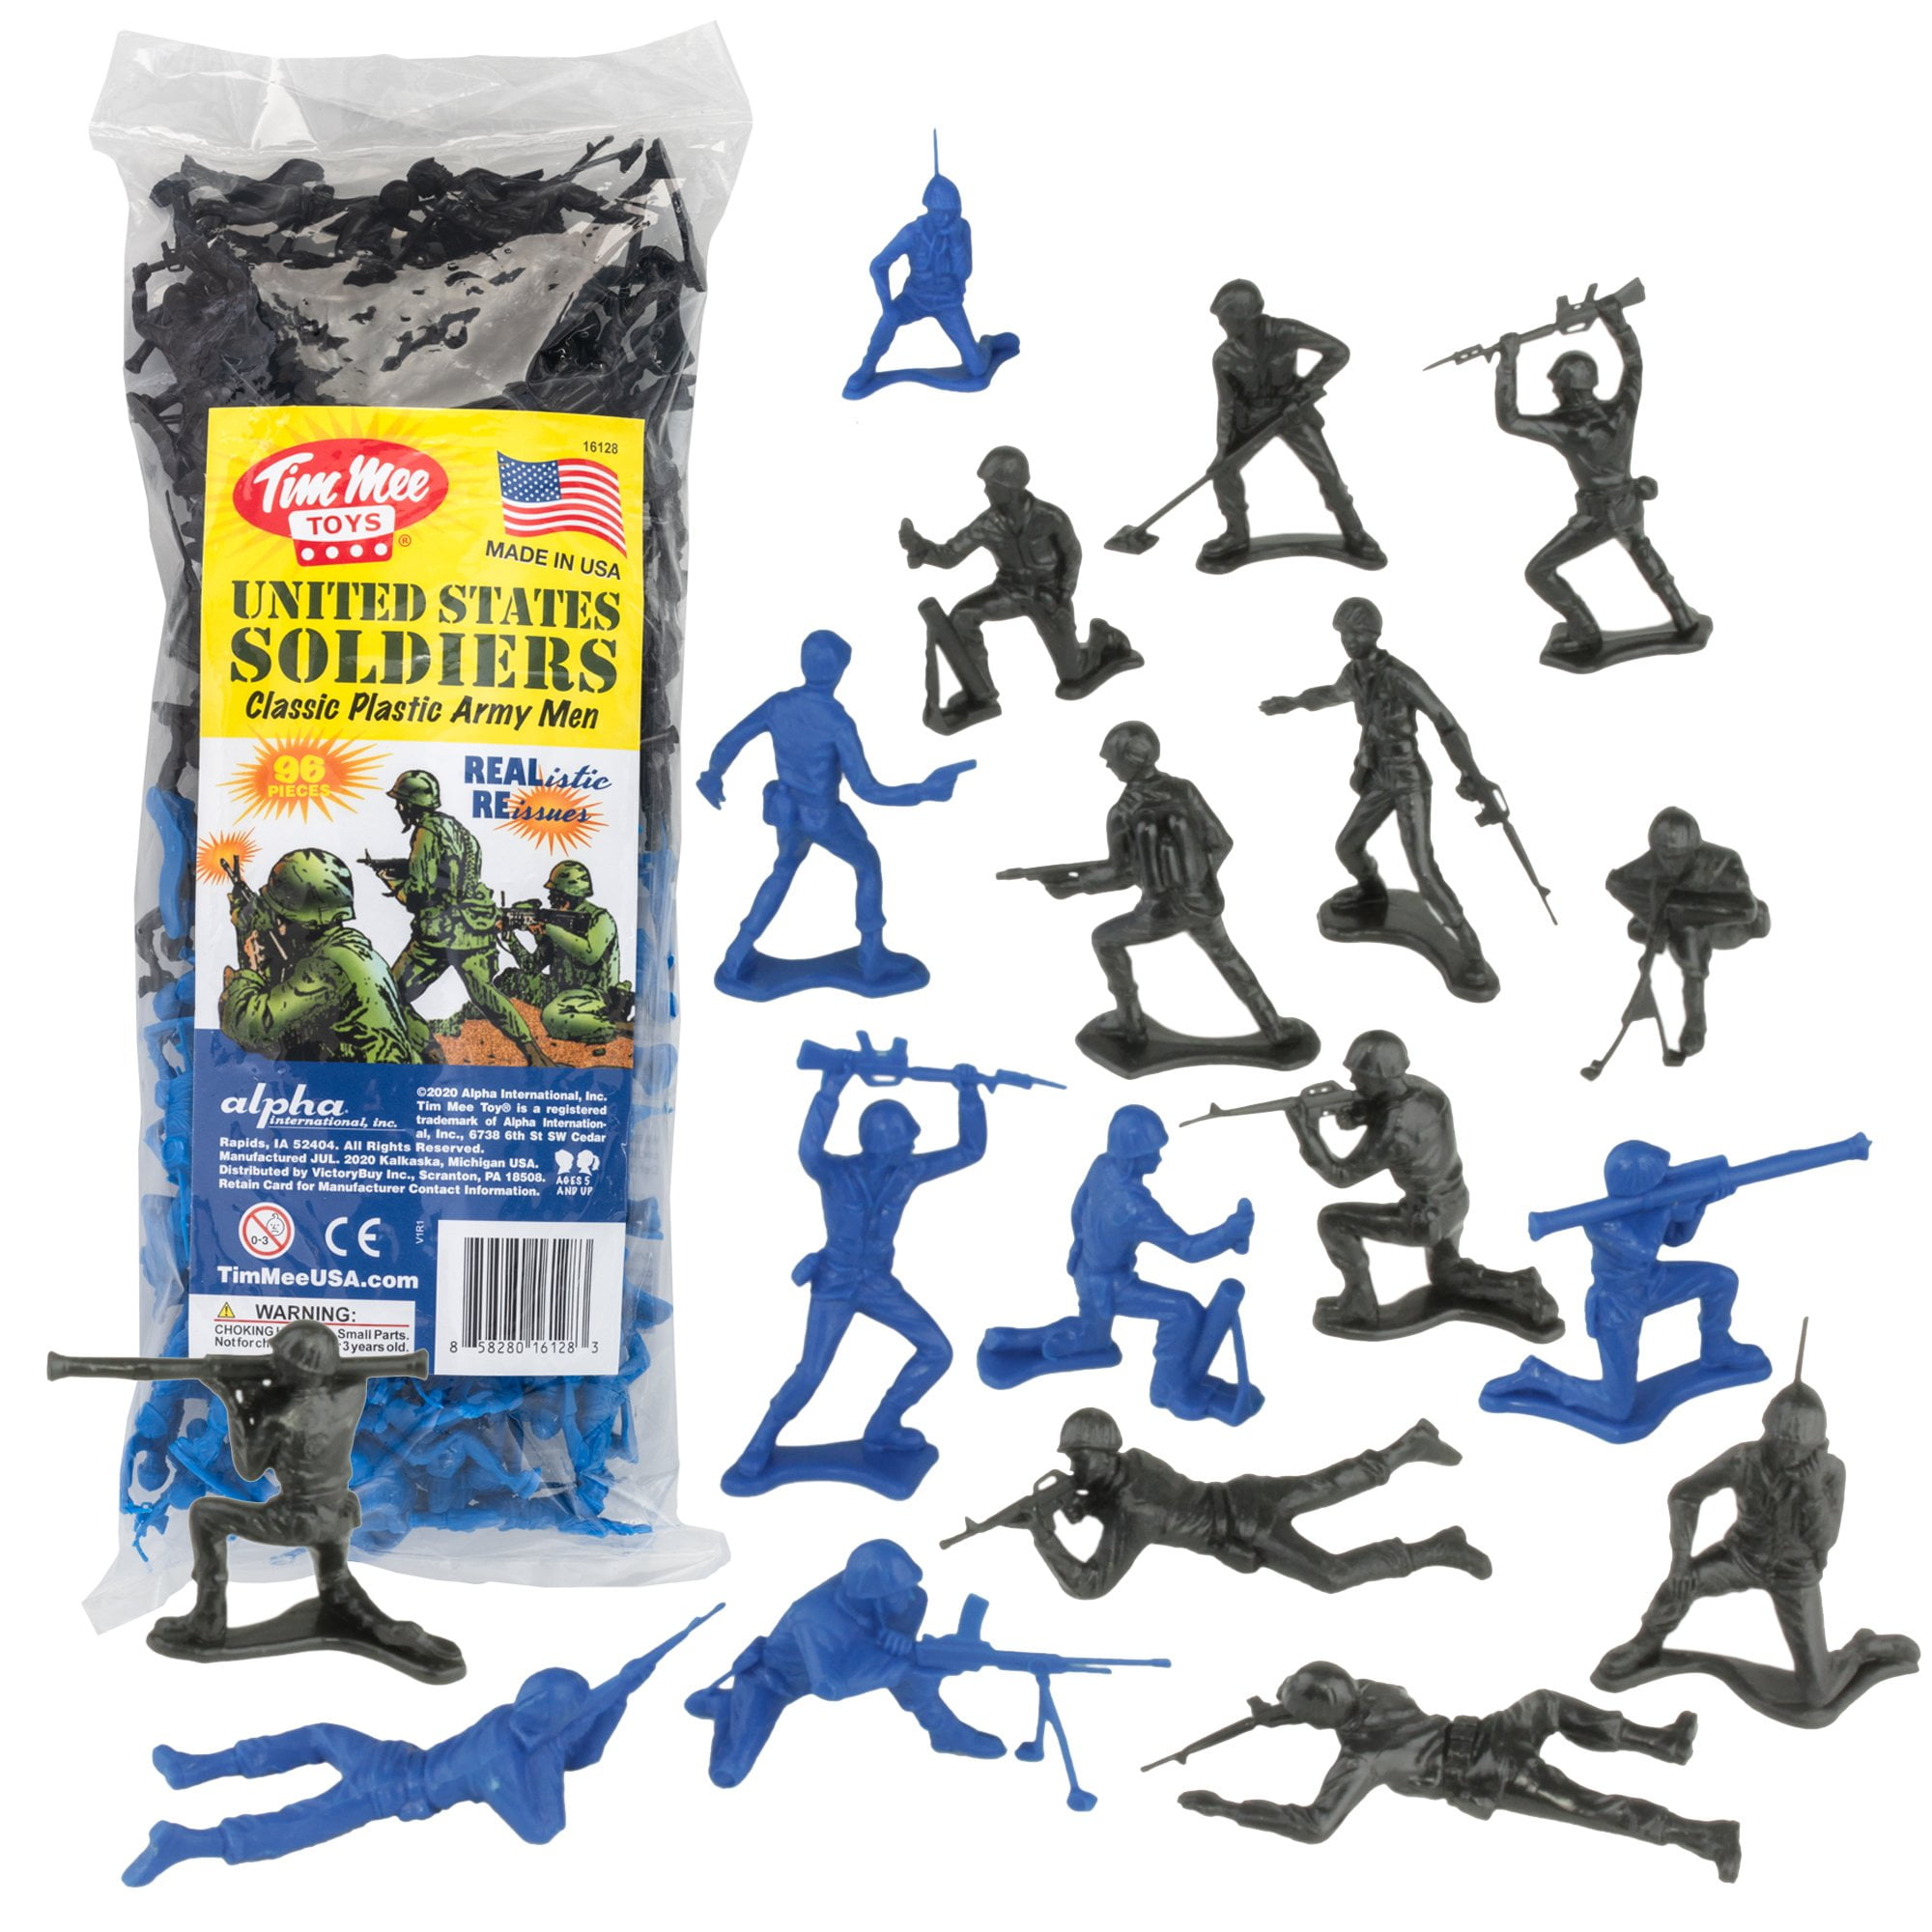 Lot of 144 Blue Plastic Army Men 1 3/4" Inch Bulk Action Figures Toy Soldiers 